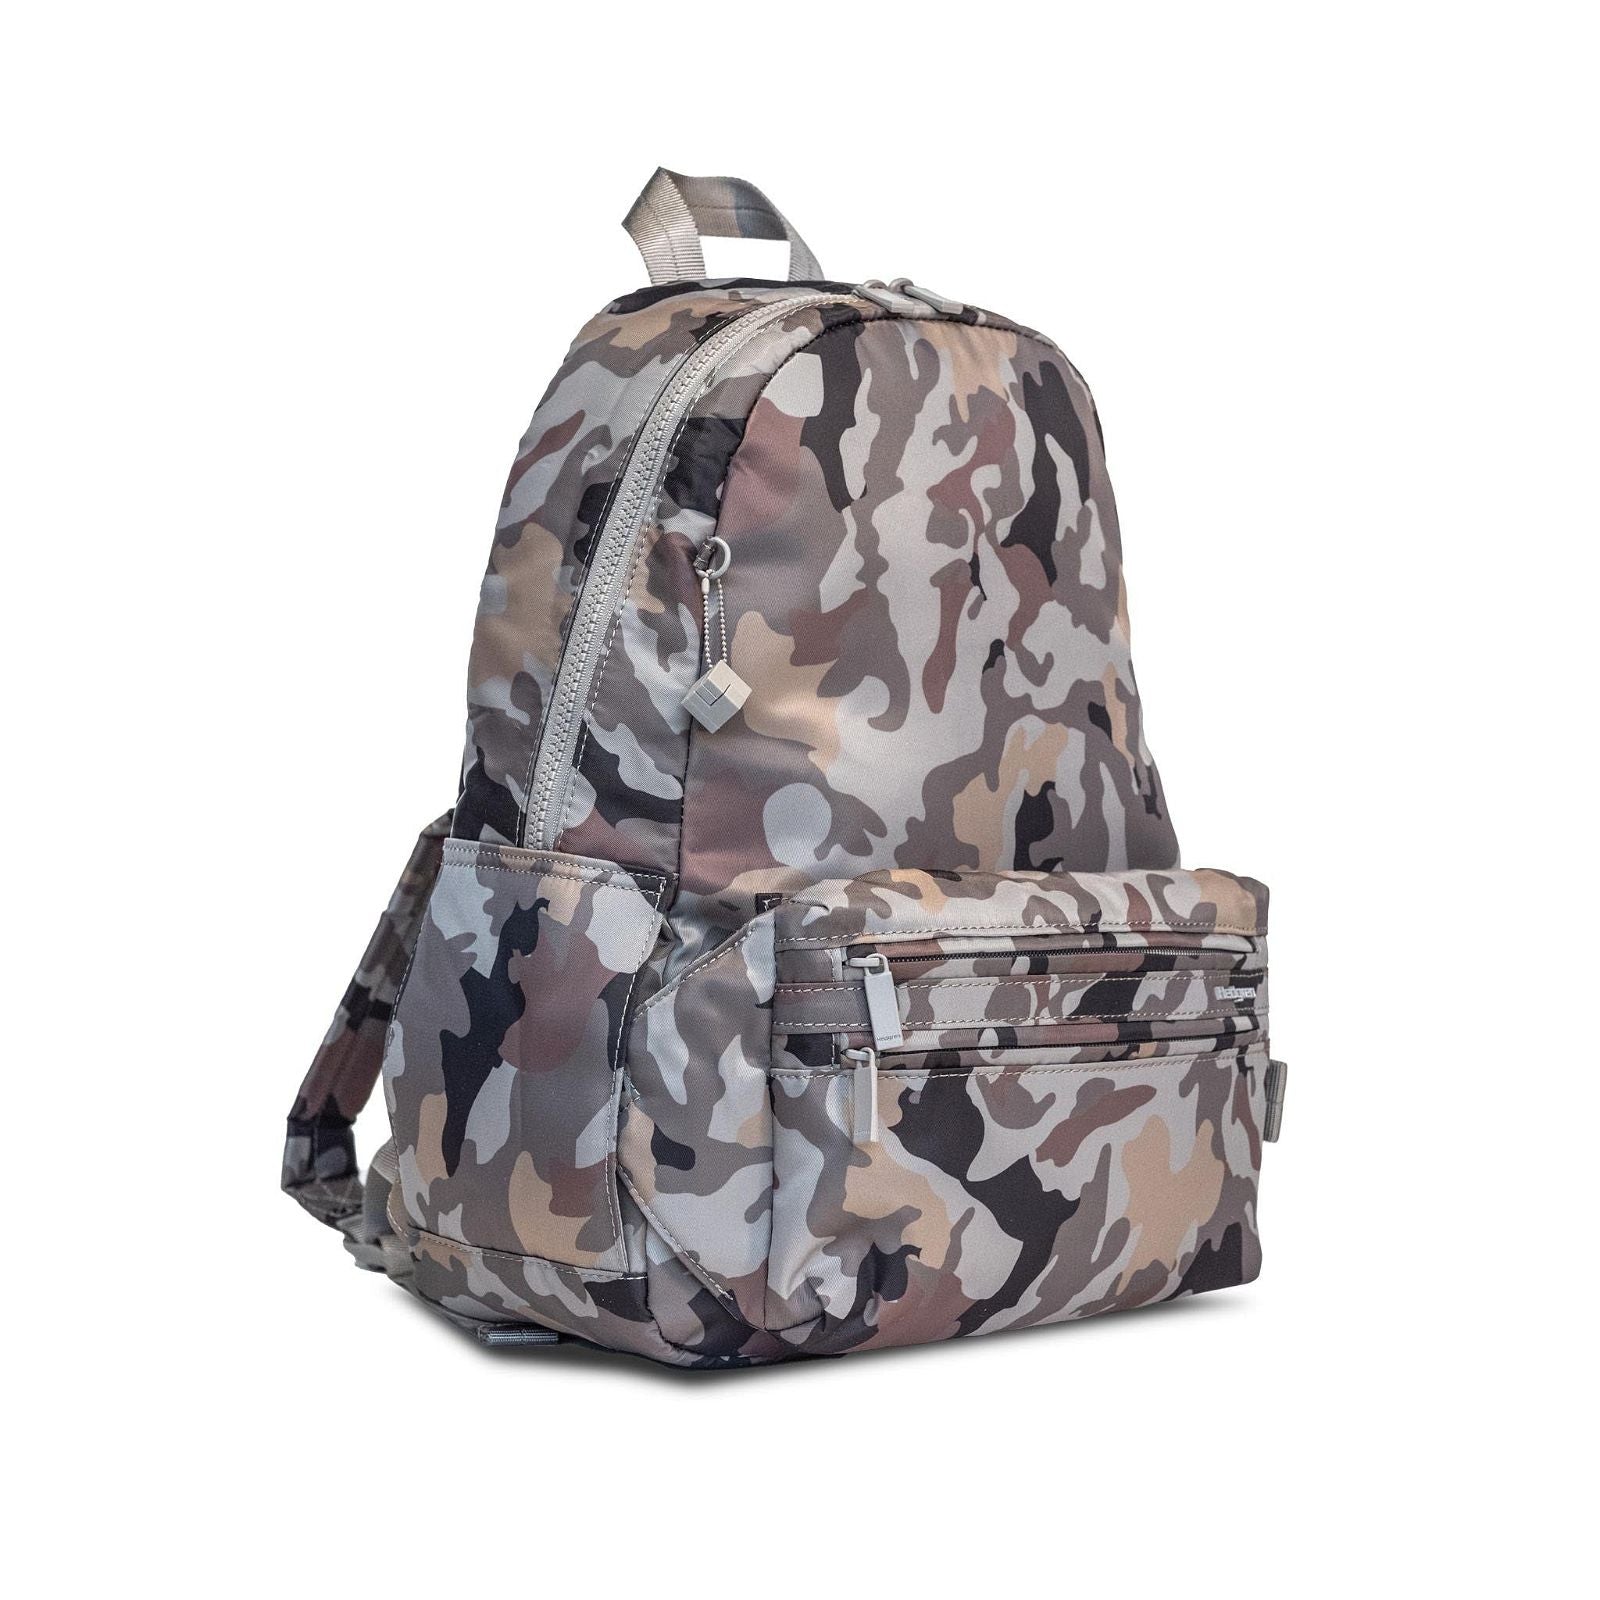 Hedgren Earth Sustainably Made Backpack with Detachable Waist Pack - rainbowbags